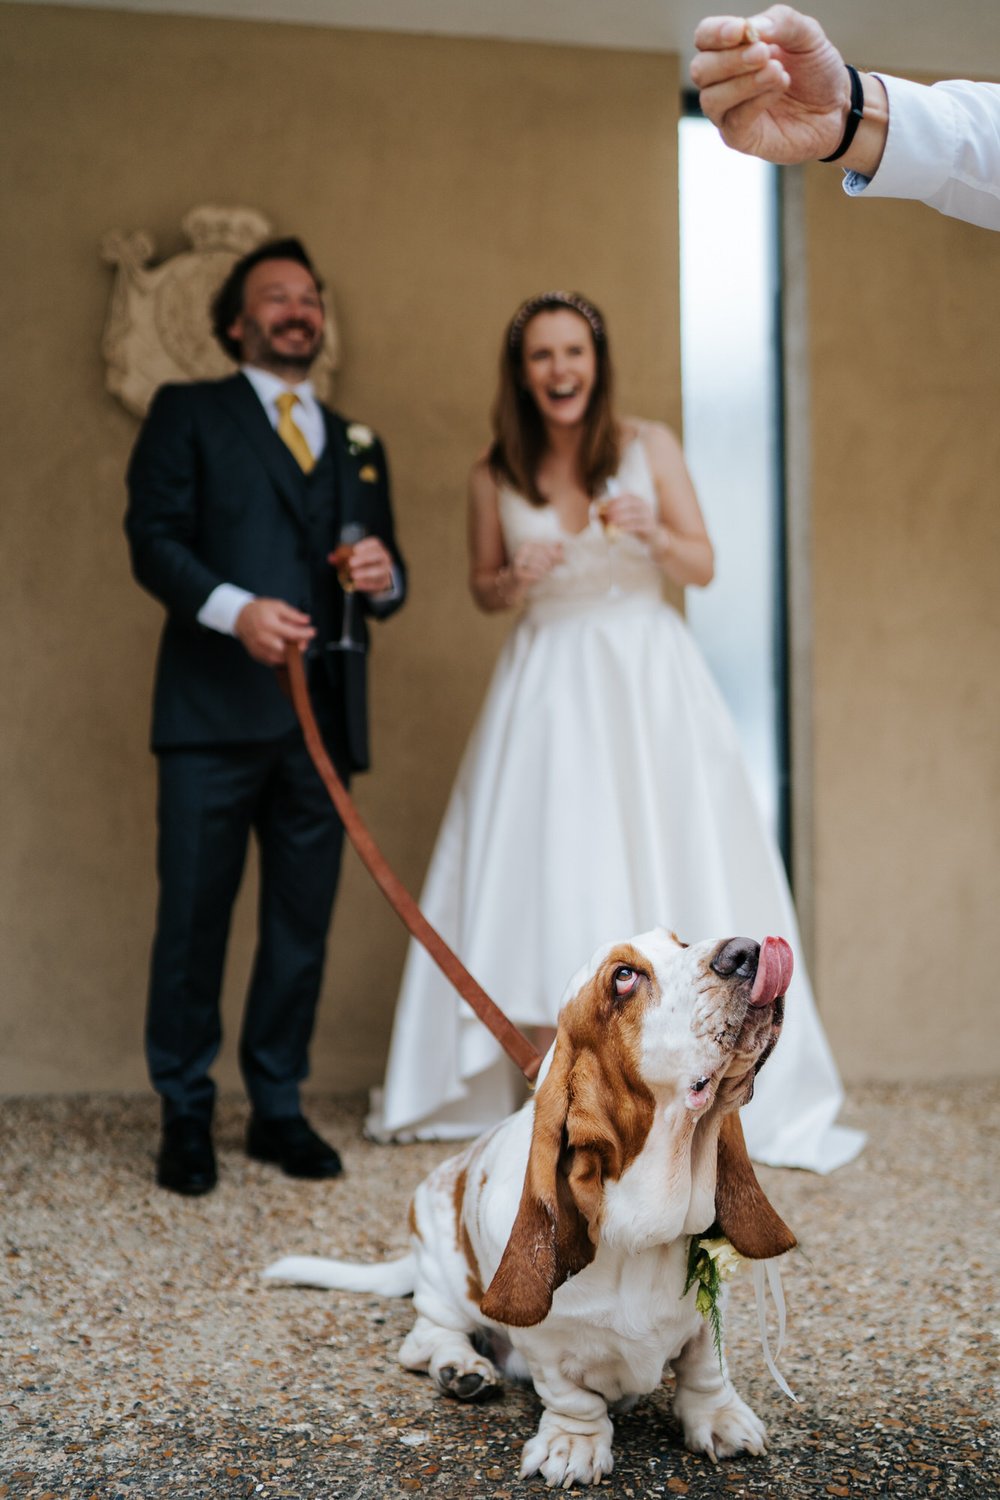 Bride and groom's basset hound salivates as he is offered a treat